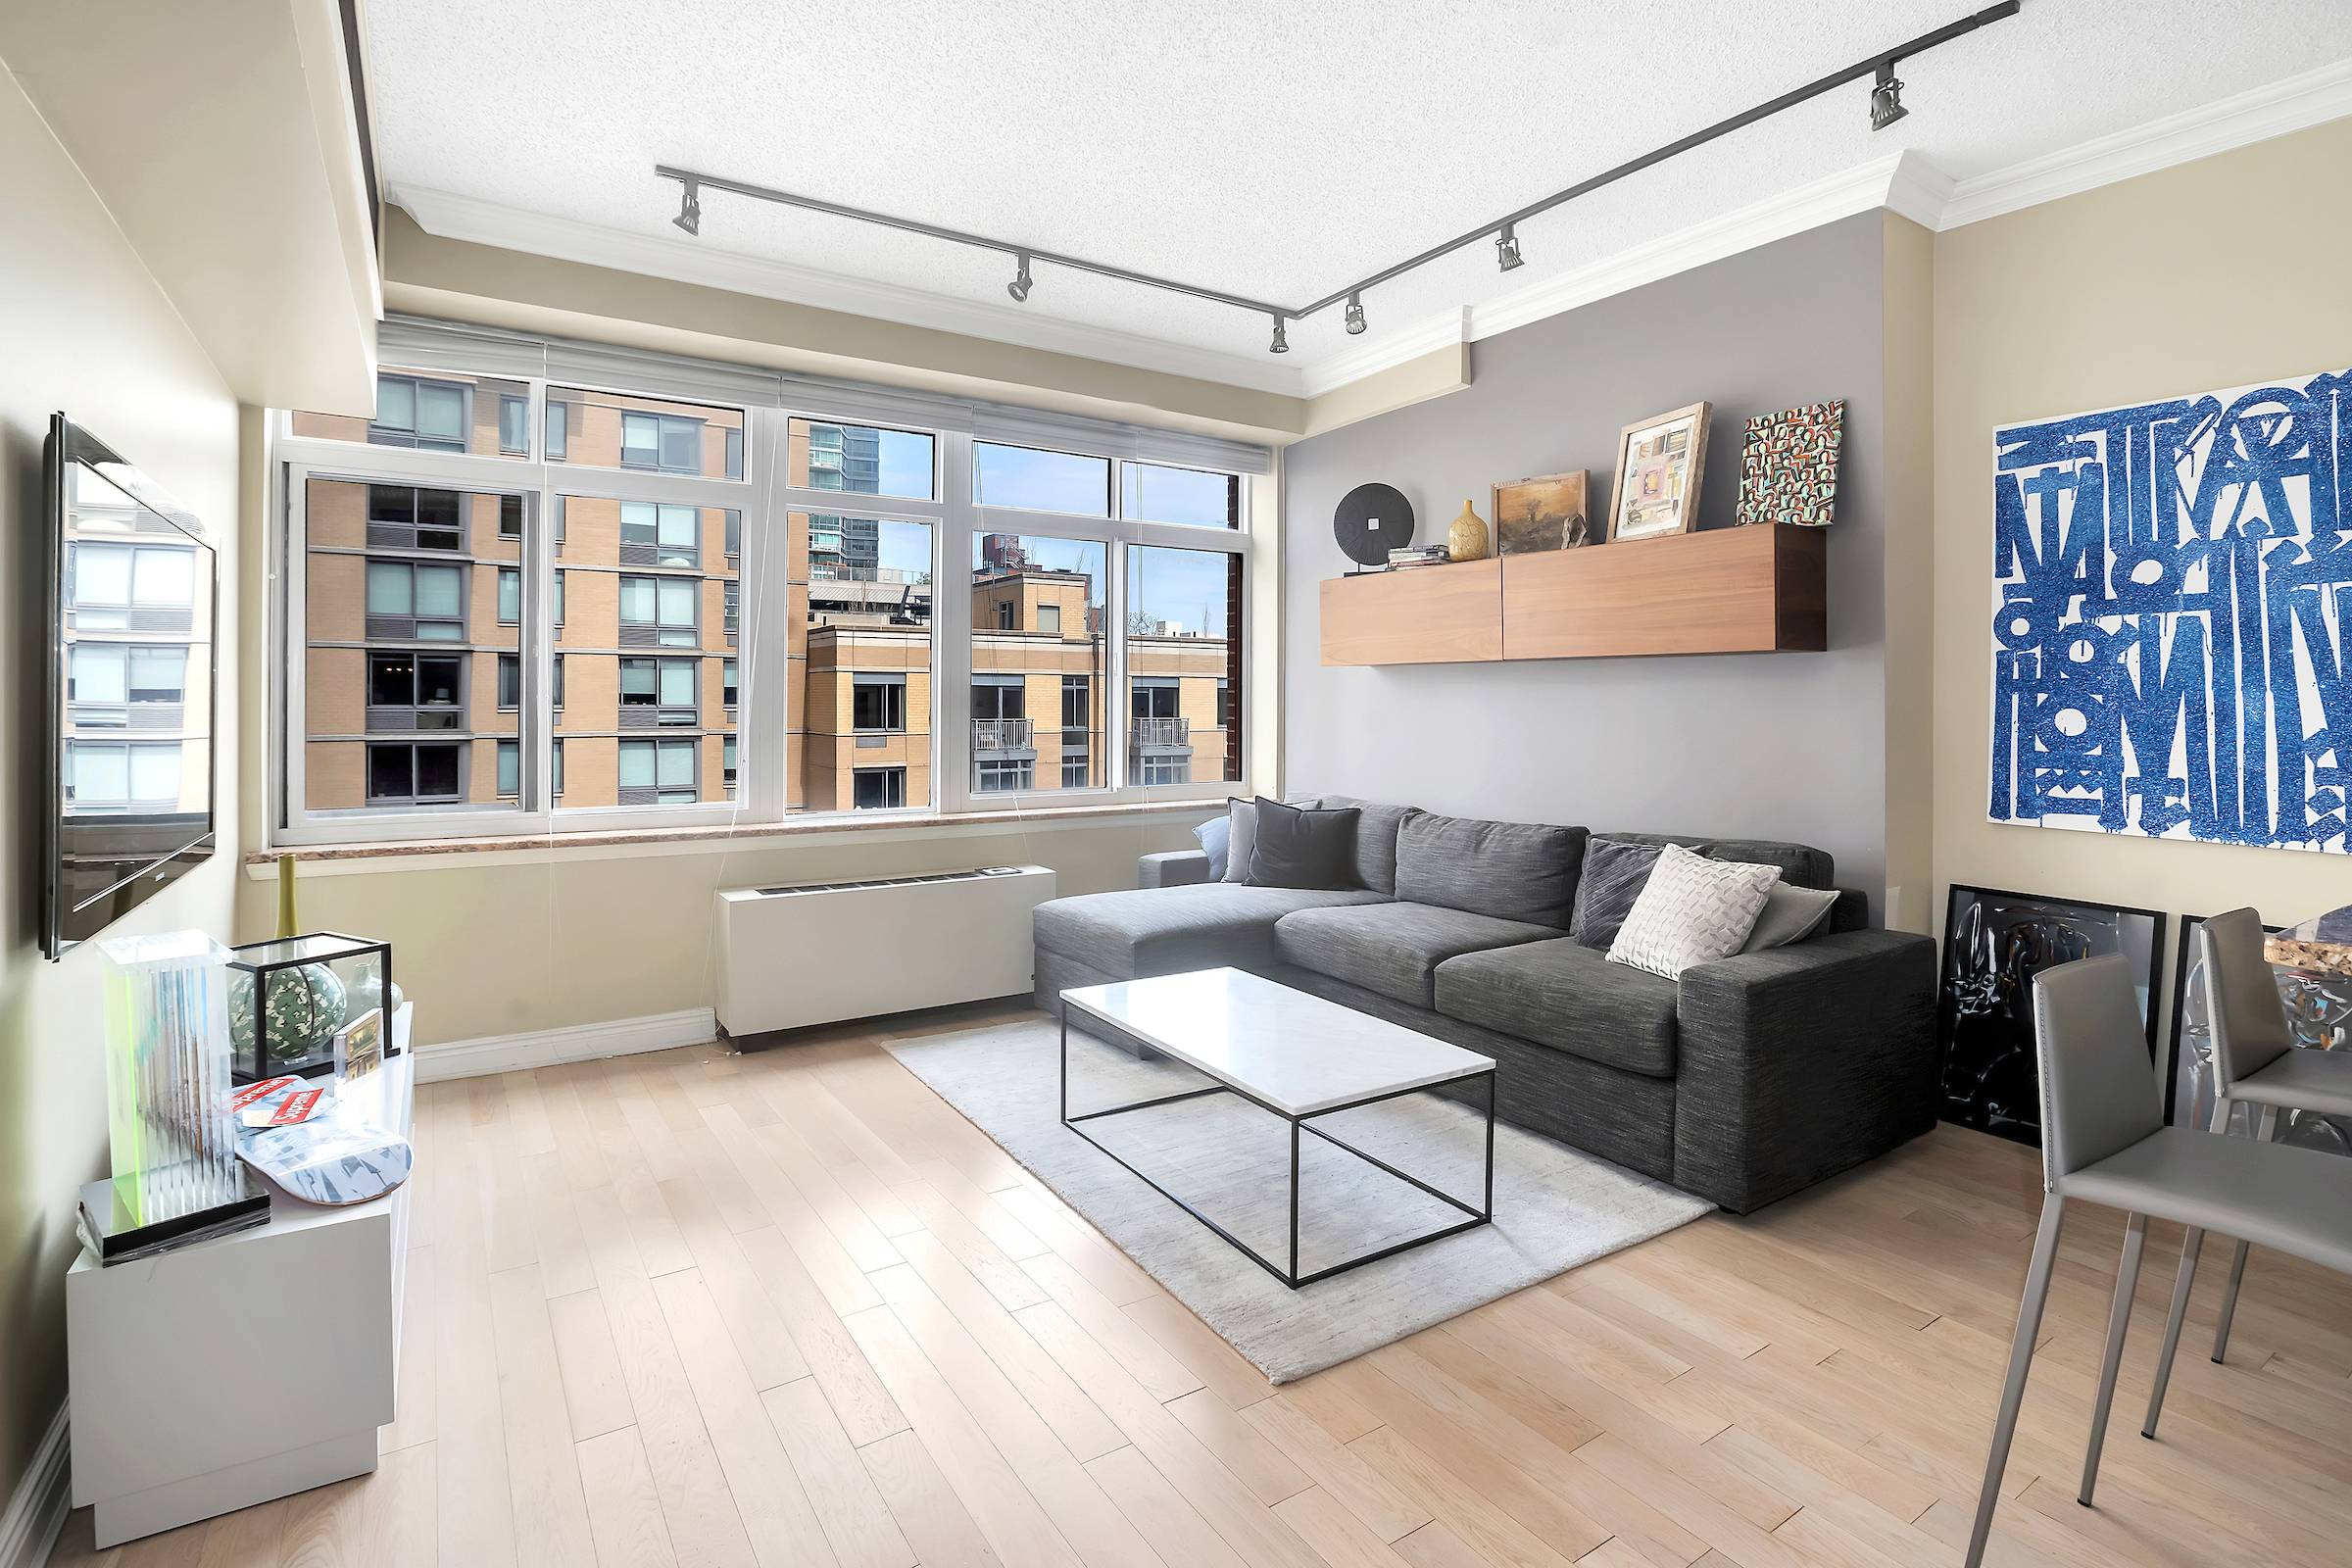 Apartment 5T is a rare one bedroom at the Citylights building because its Maintenance of 1, 138.